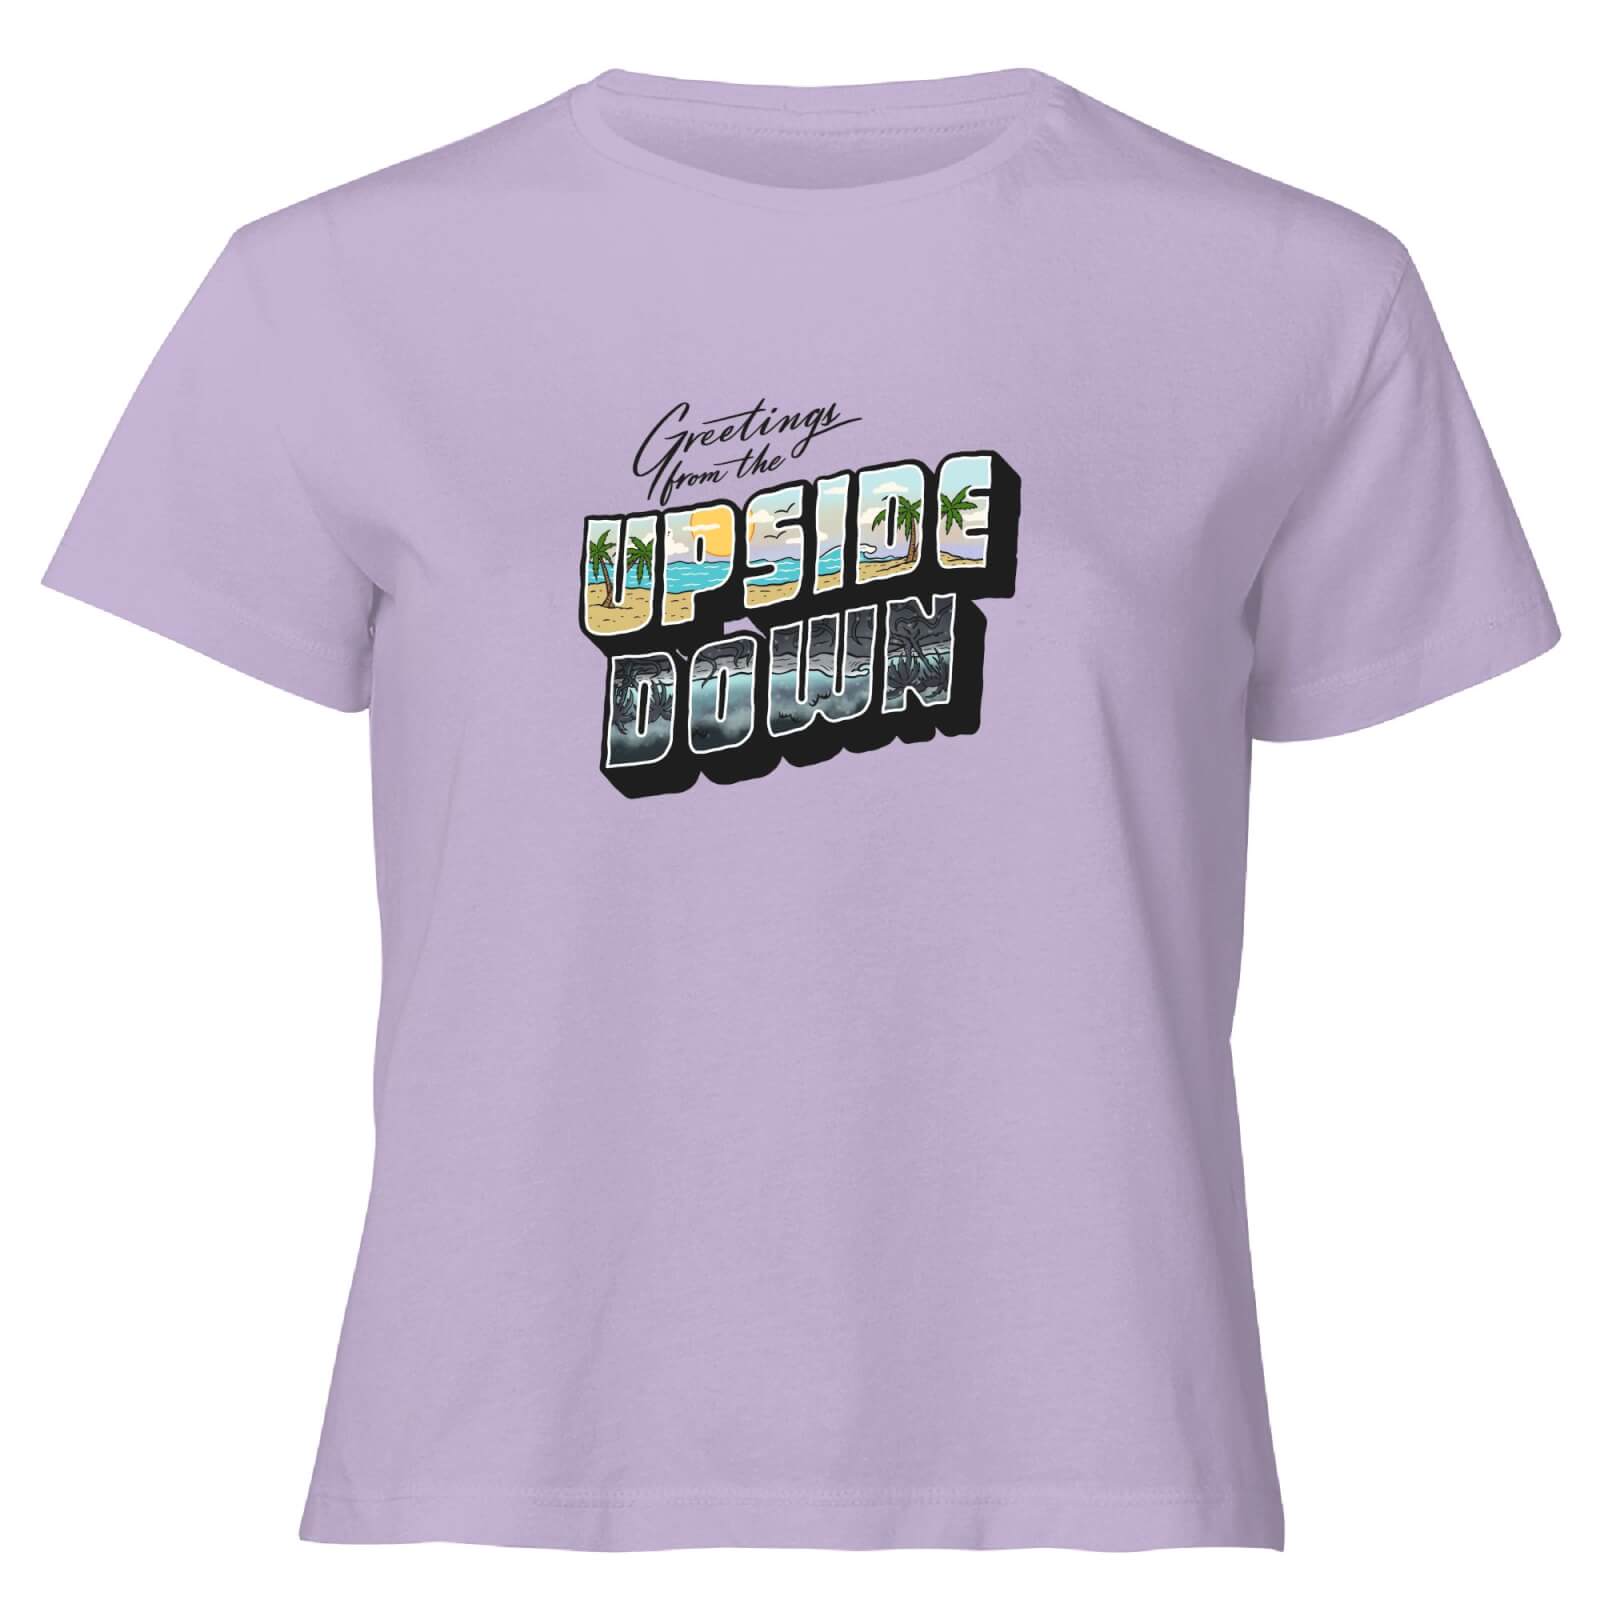 Stranger Things Greetings From The Upside Down Women's Cropped T-Shirt - Lilac - XXL - Lilac